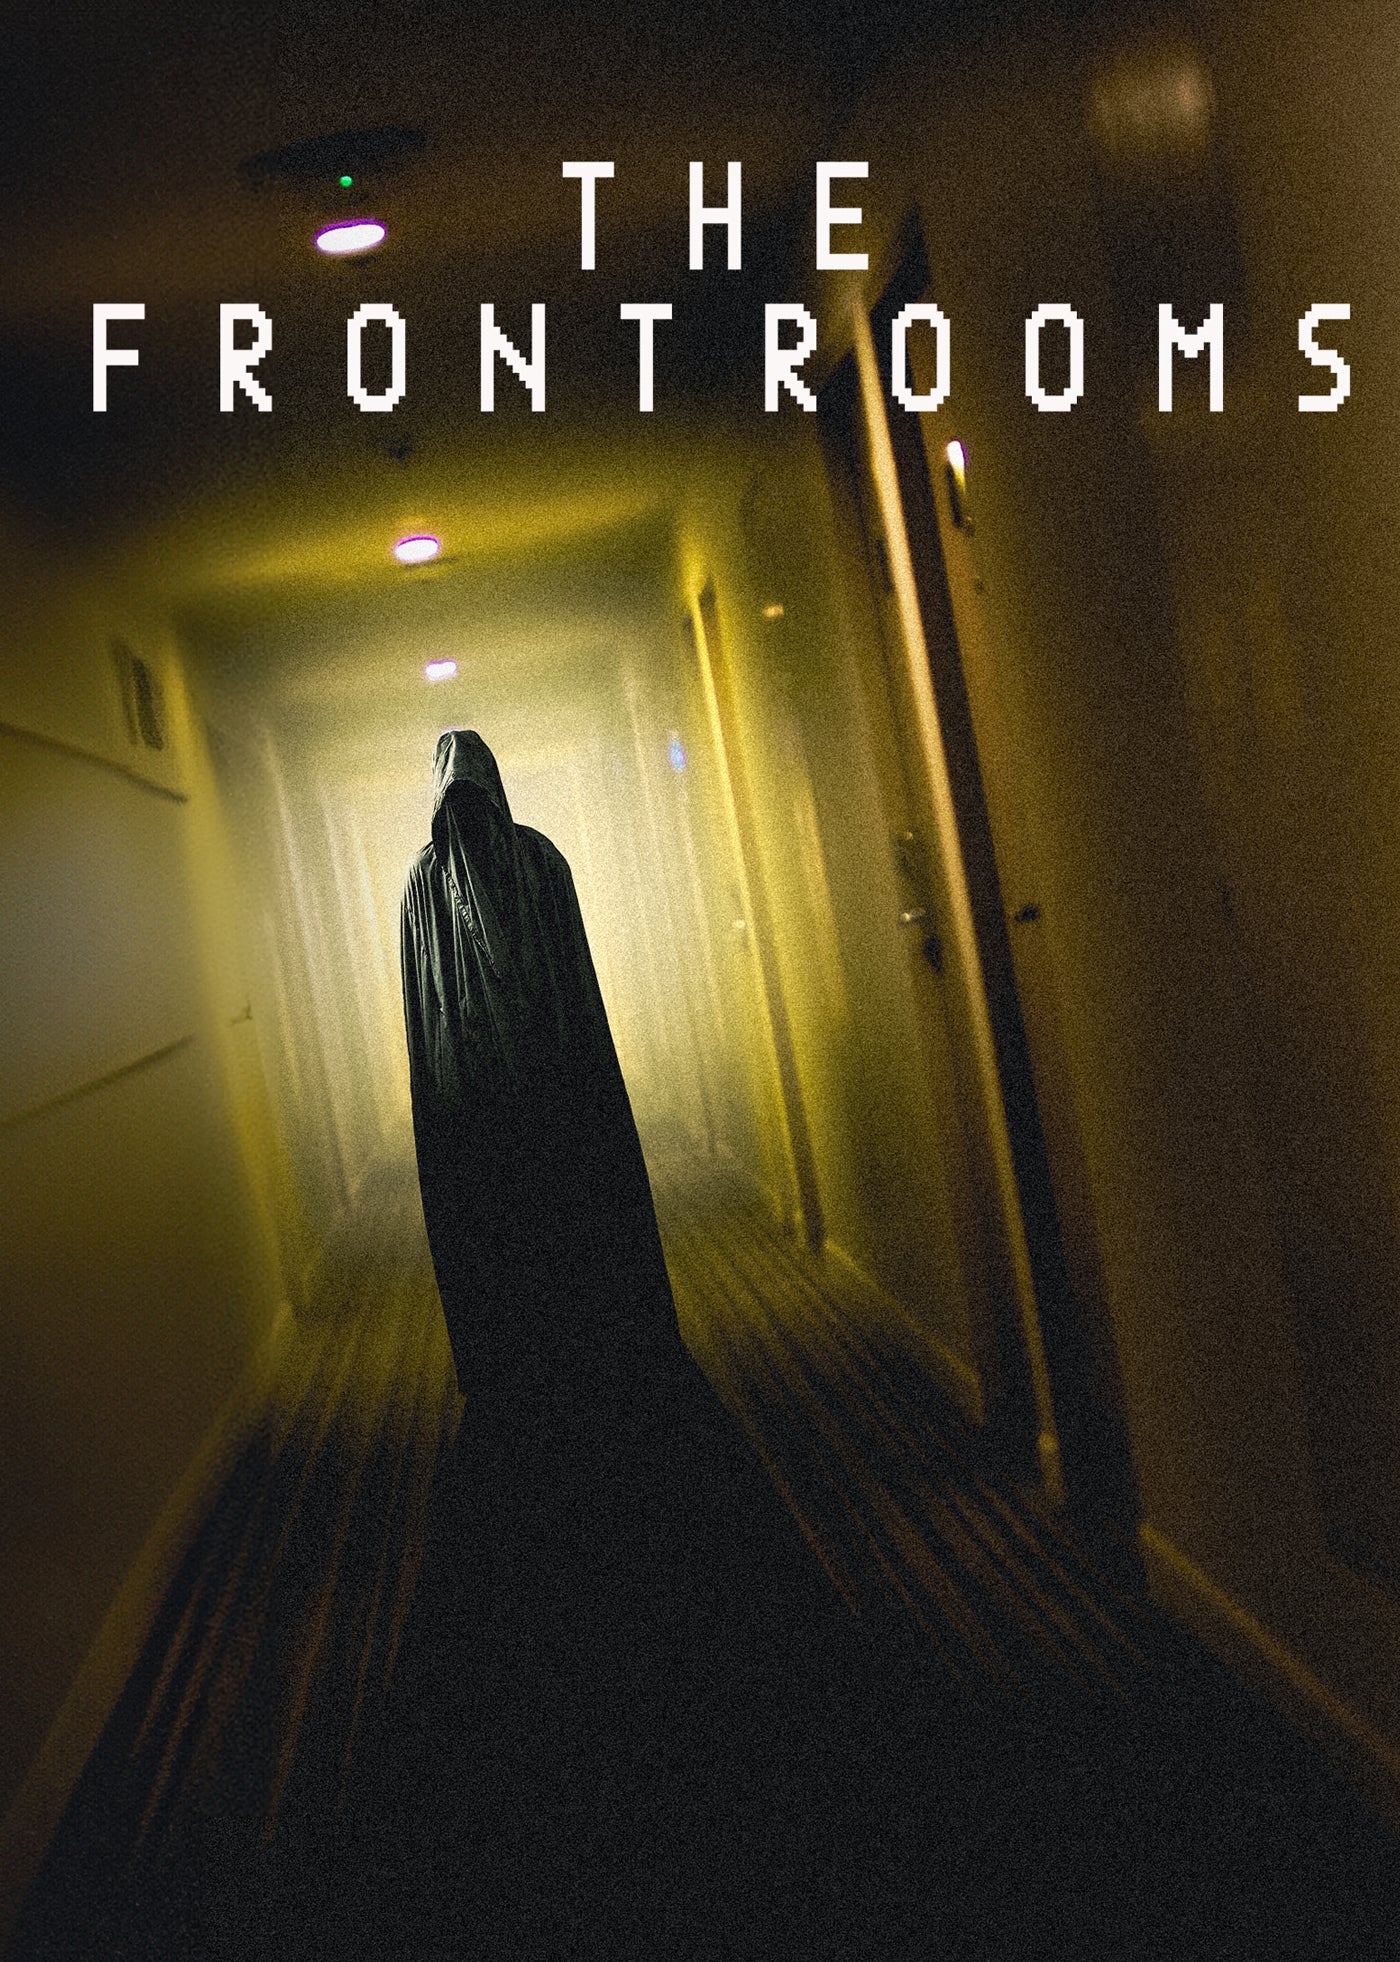 THE FRONTROOMS DVD [PRE-ORDER]